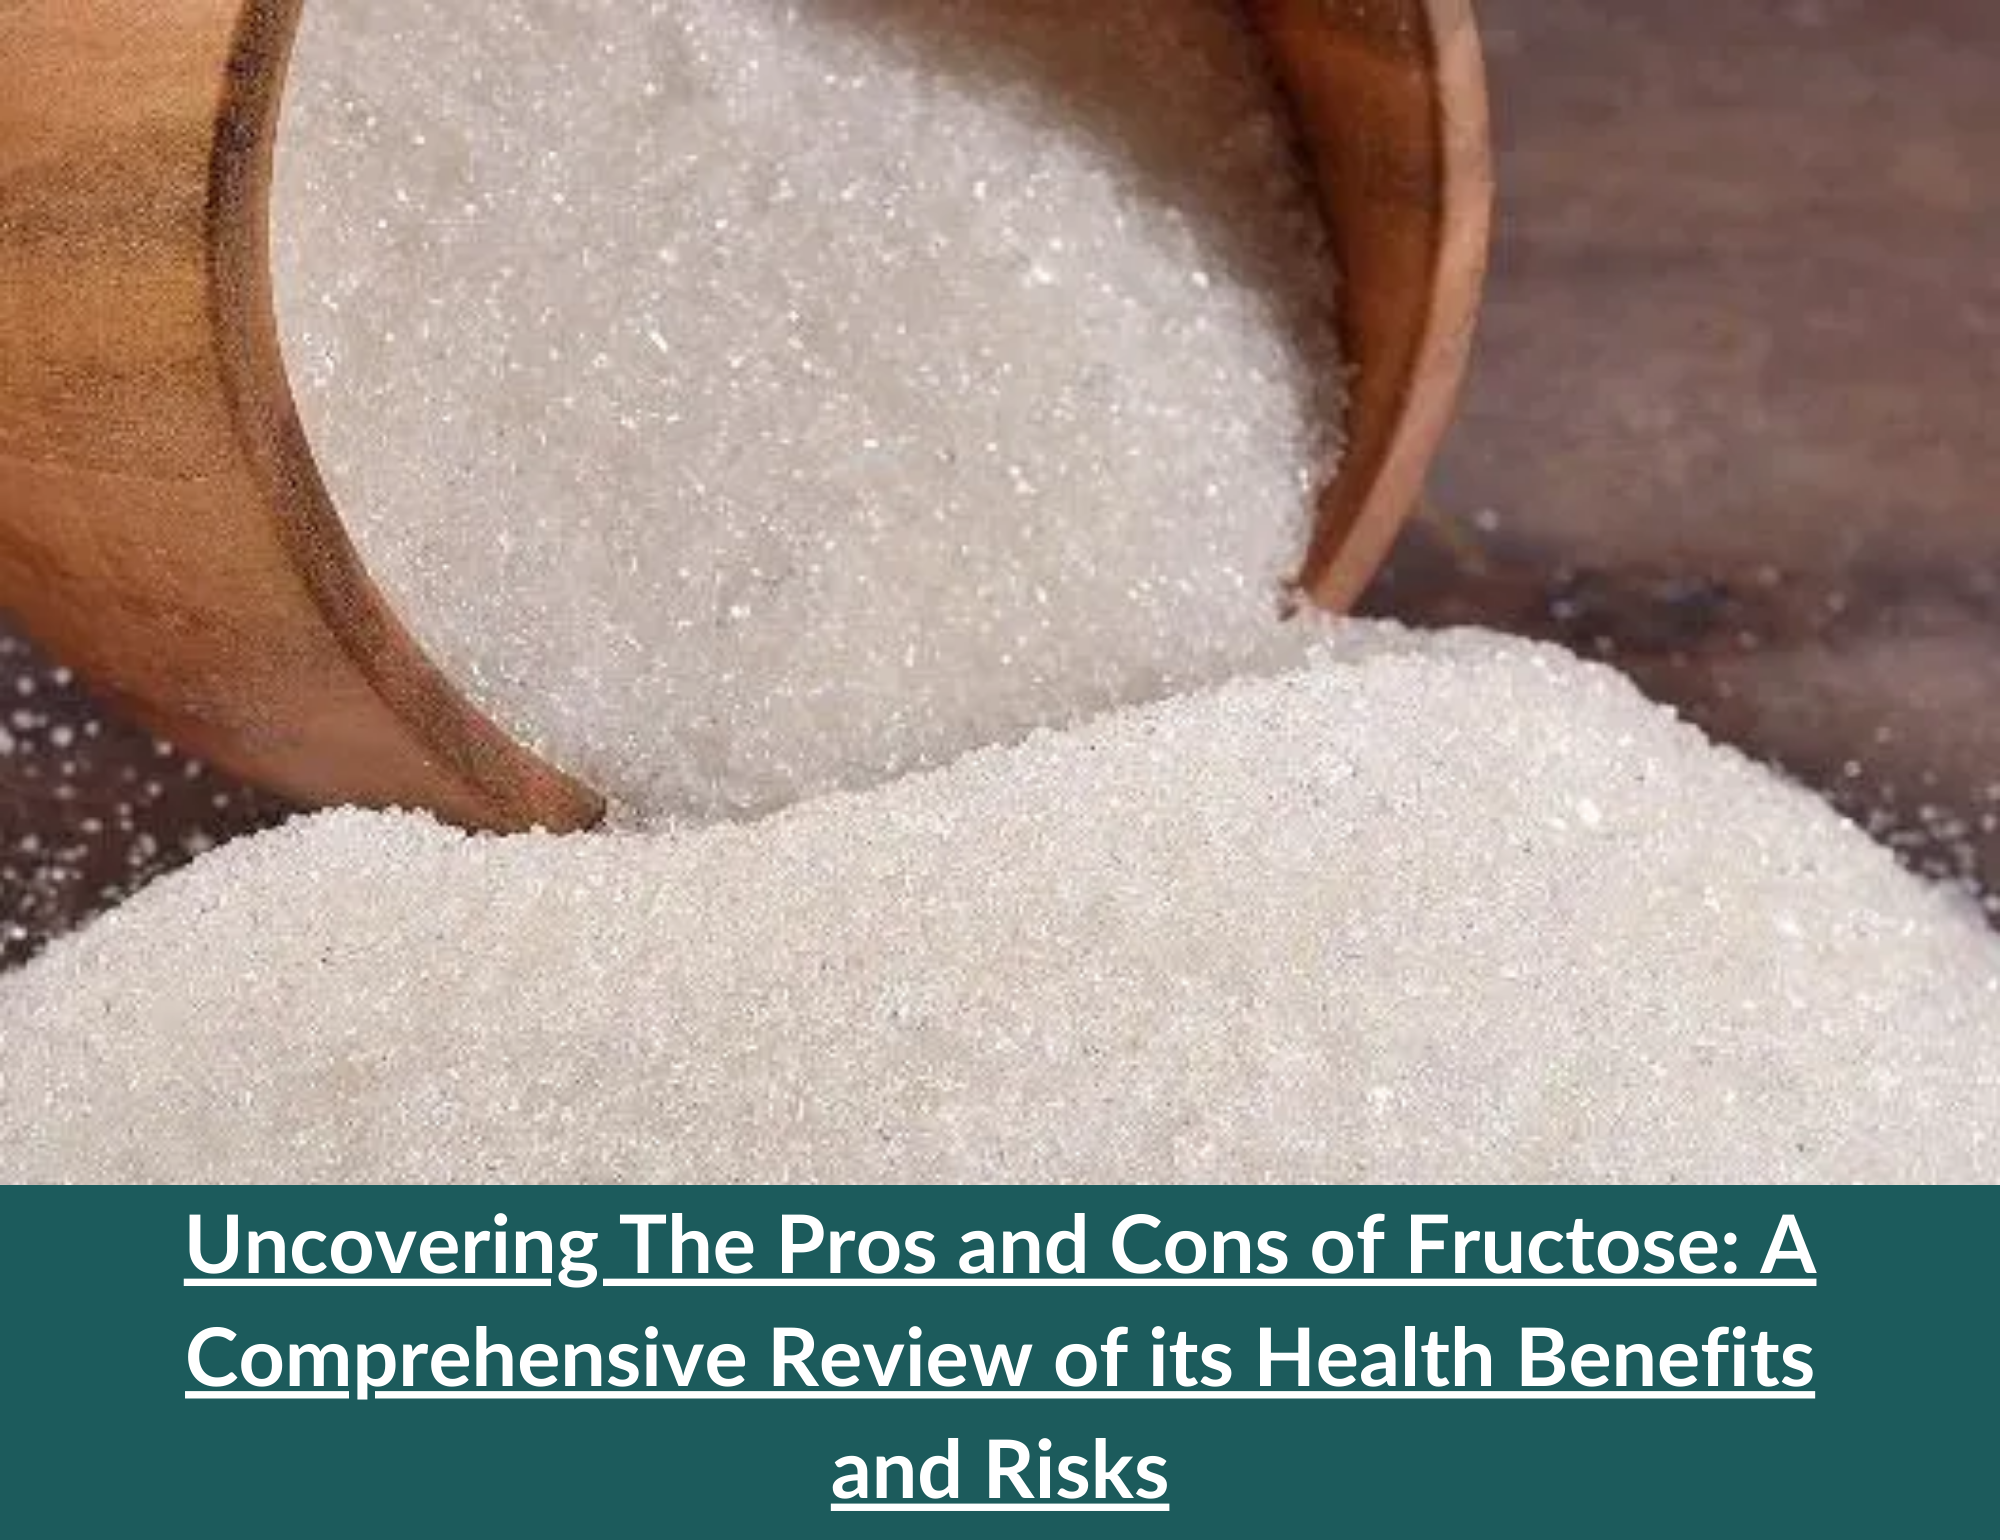 Pros and Cons of Fructose